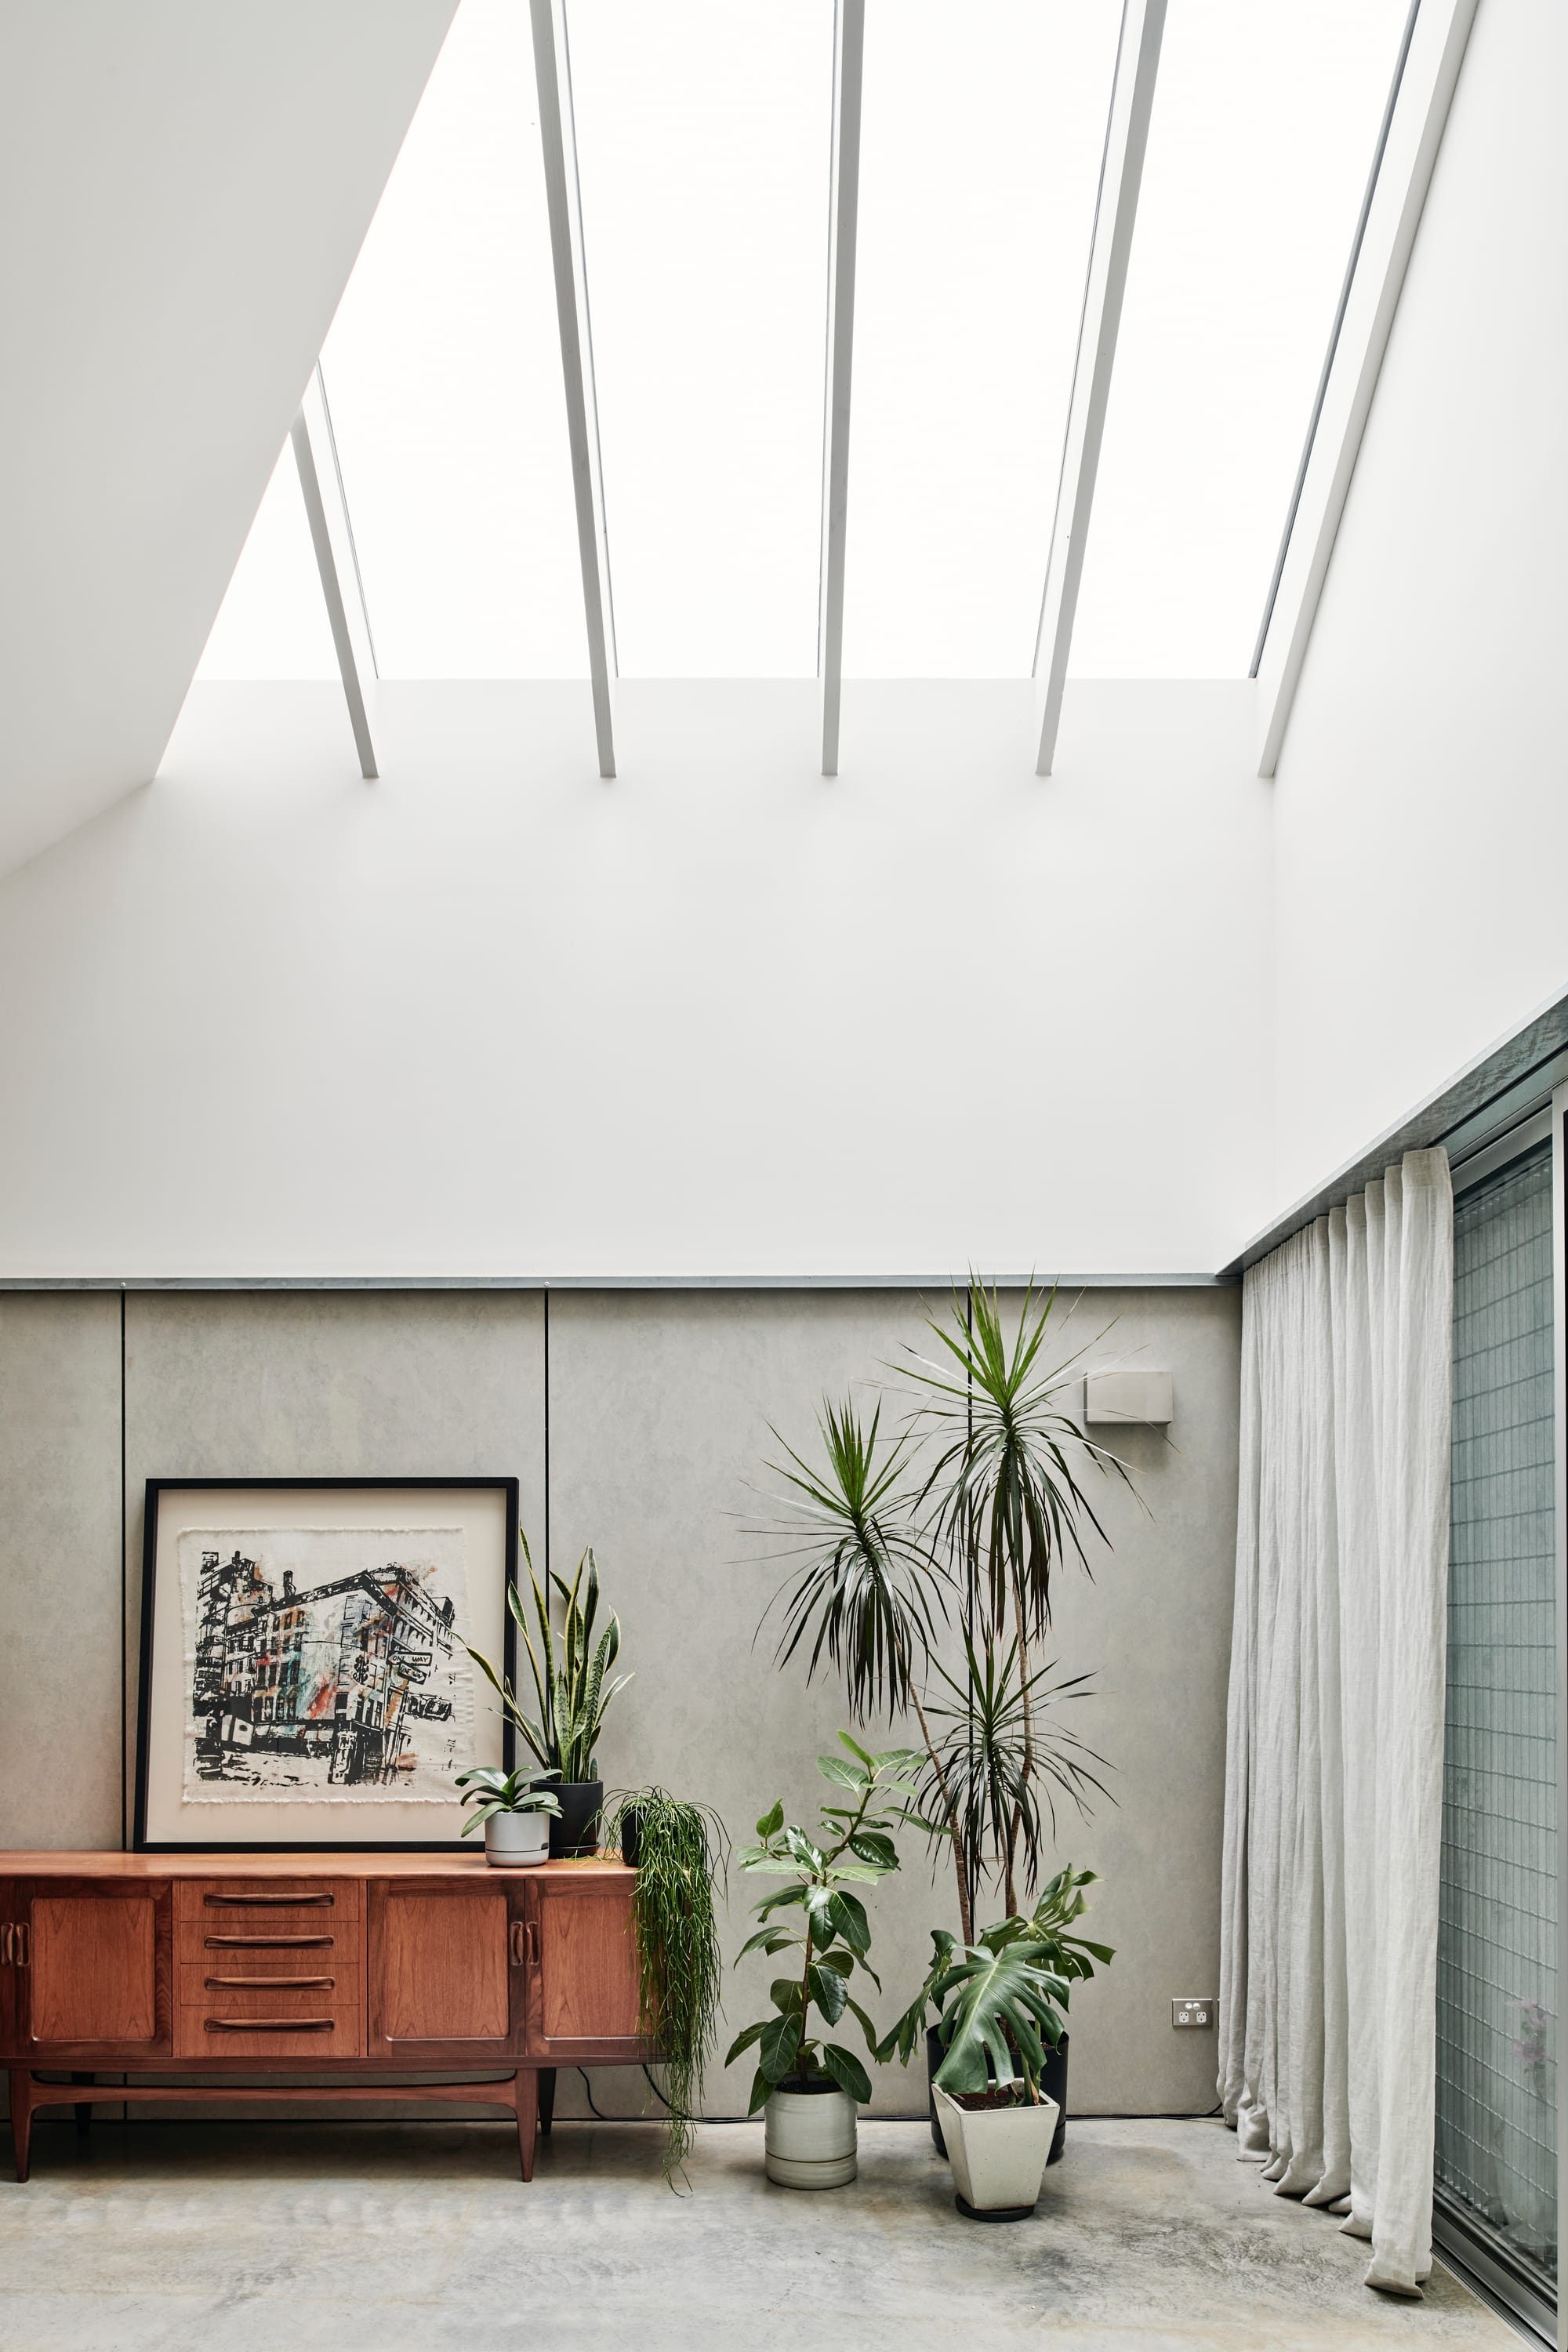 That Old Chestnut by FIGR. Architecture & Design. Photography by Tom Blachford. Residential living room space with concrete floors, cocnrete-finish walls and tall, pitched ceilings with skylights. Space furnished with timber sideboard and plants. 